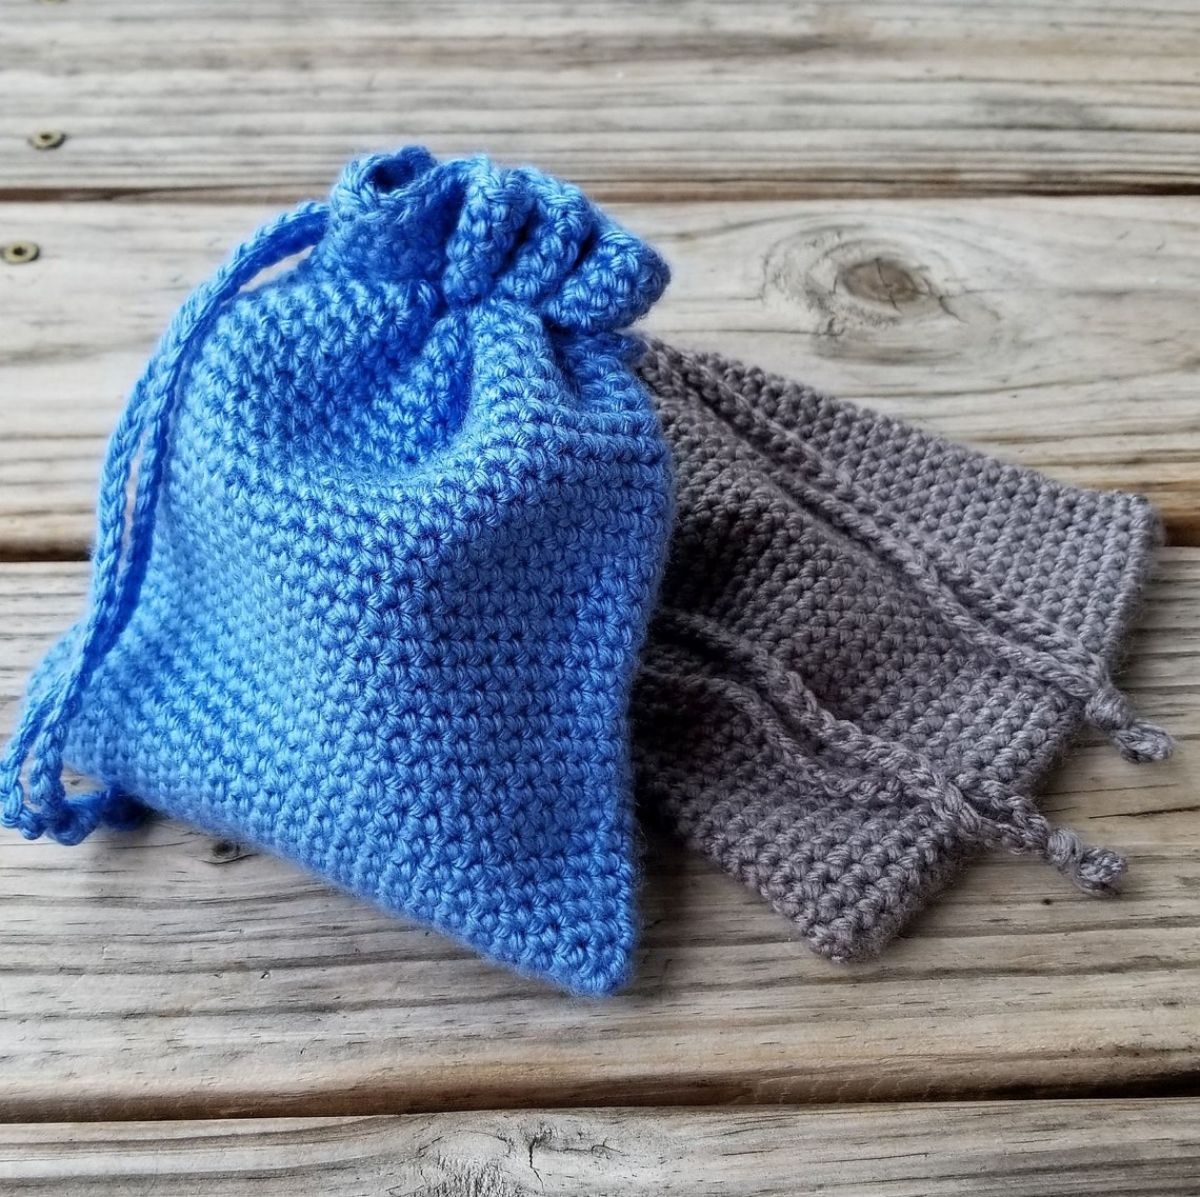  Small crochet blue drawstring bag sitting on a grey drawstring bag roughly the size of jewelry bags laying on a wooden table.